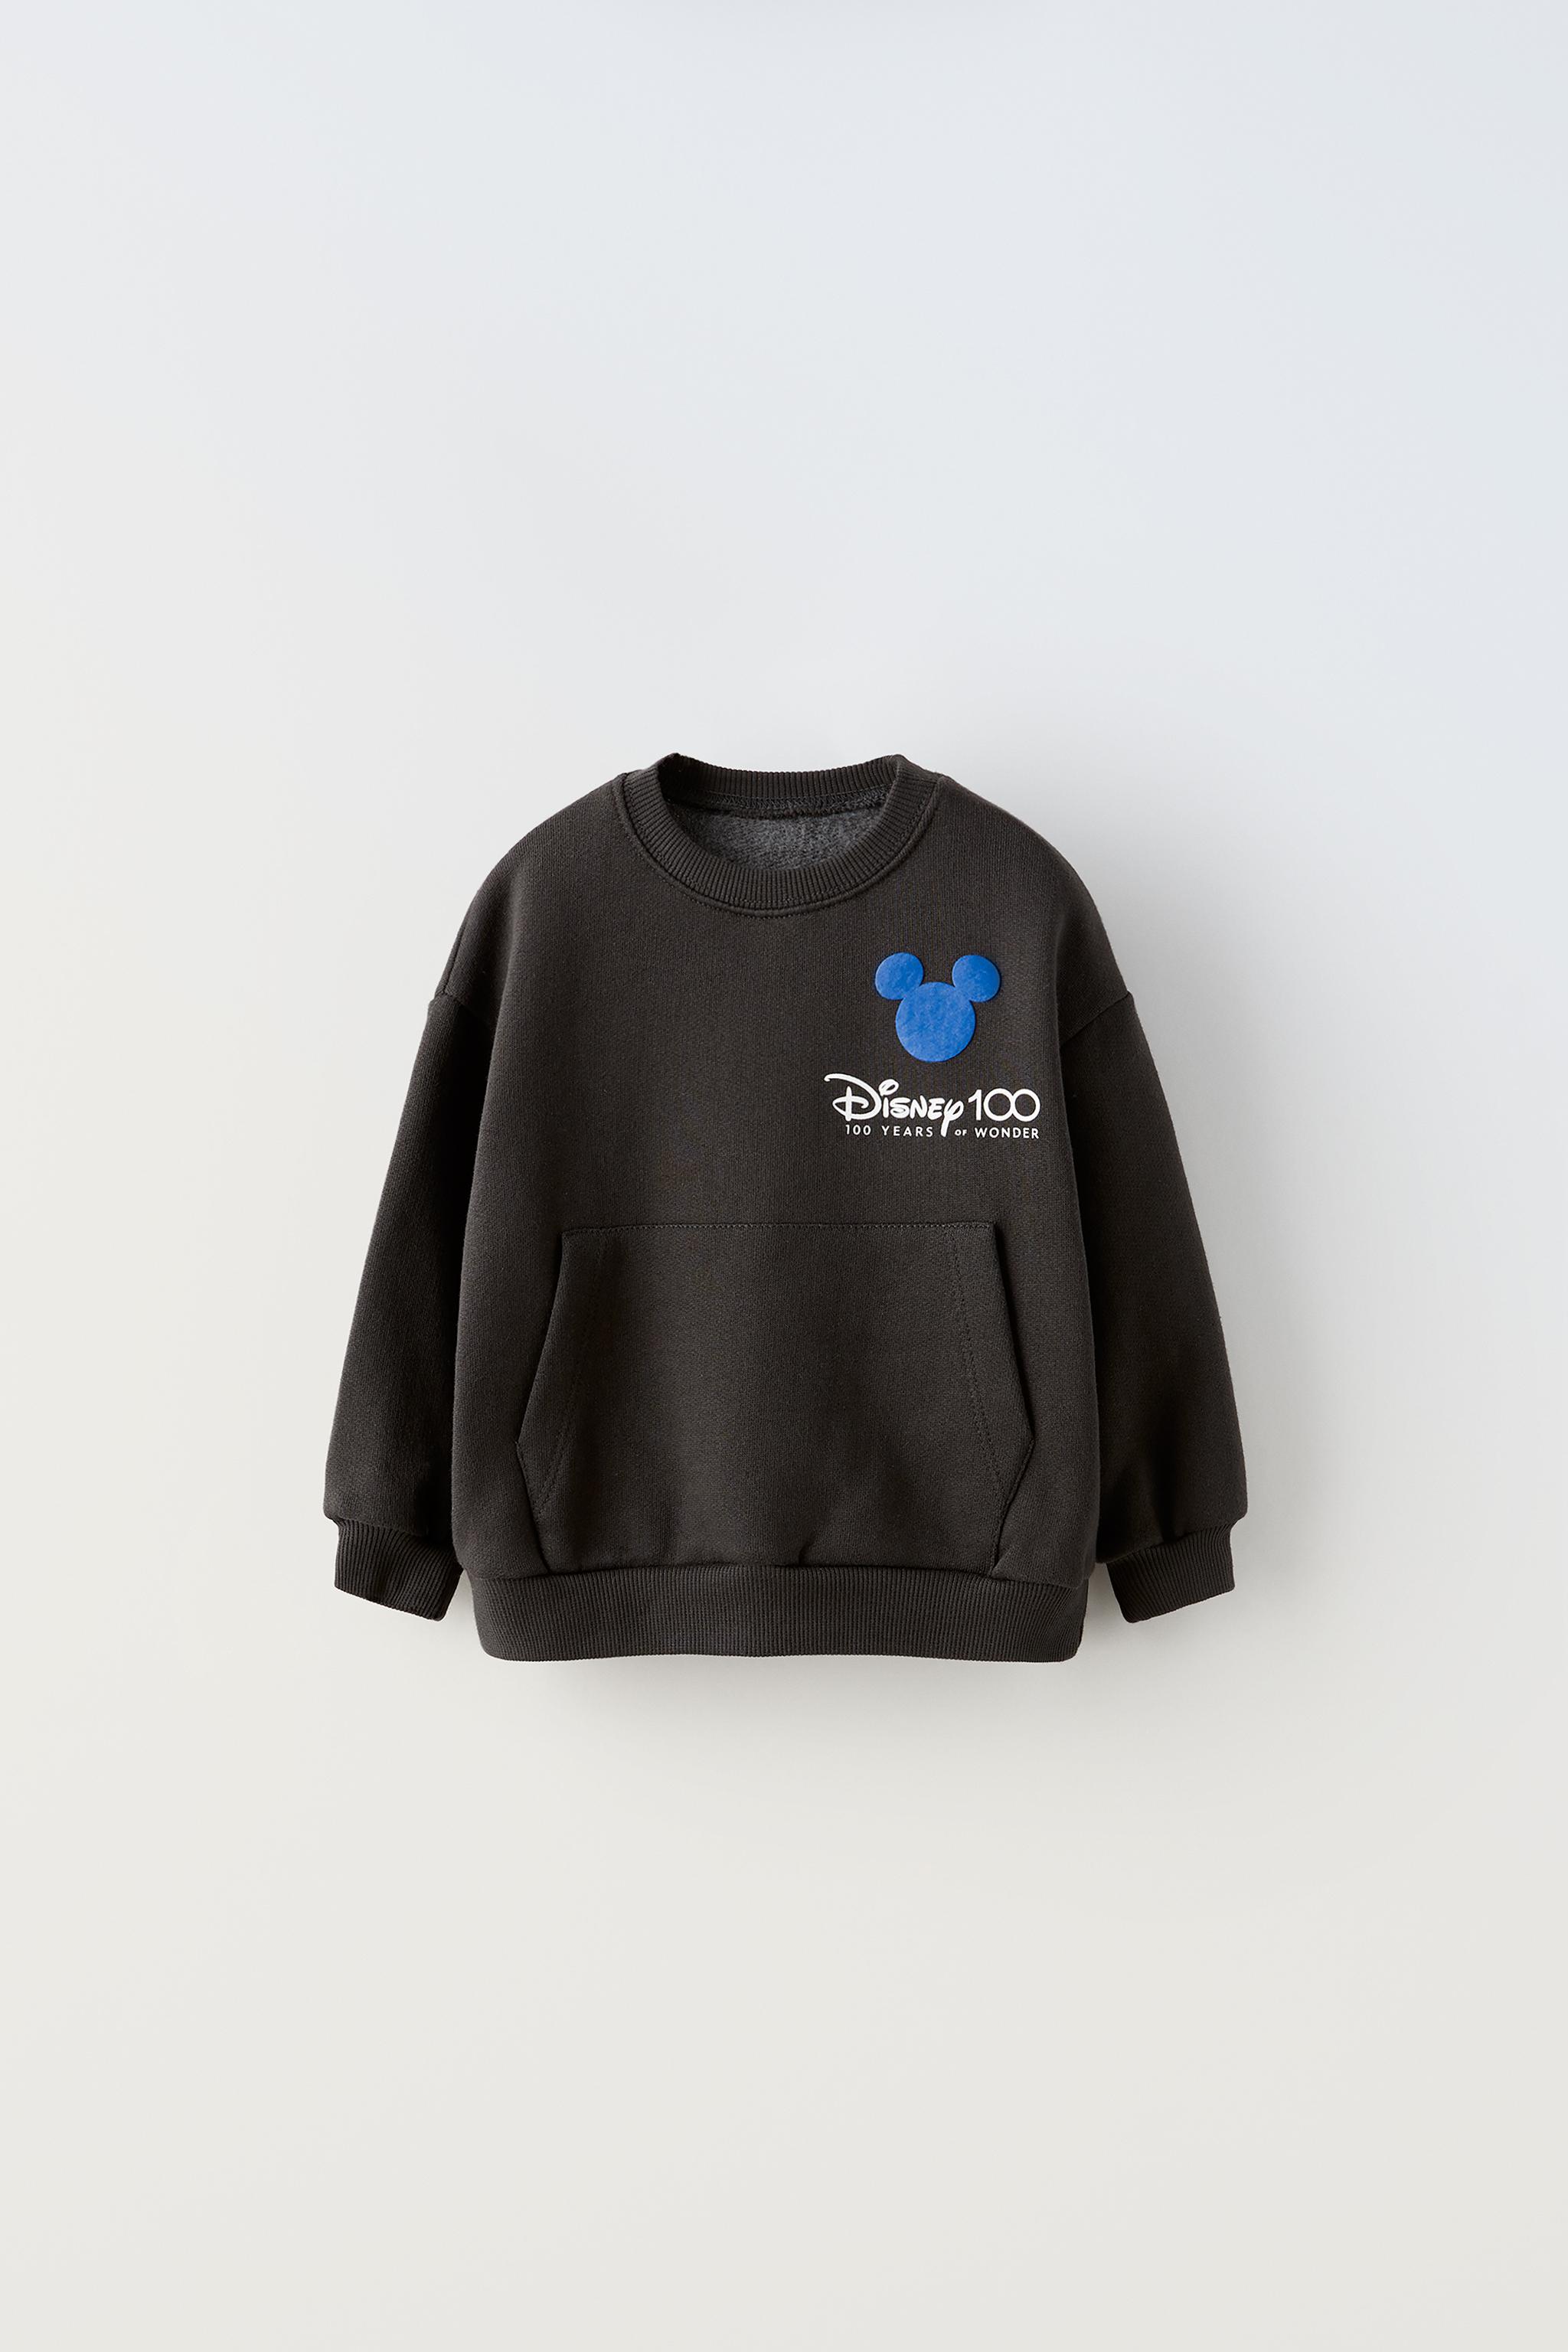 MICKEY MOUSE AND FRIENDS © DISNEY 100TH ANNIVERSARY HOODIE - Black